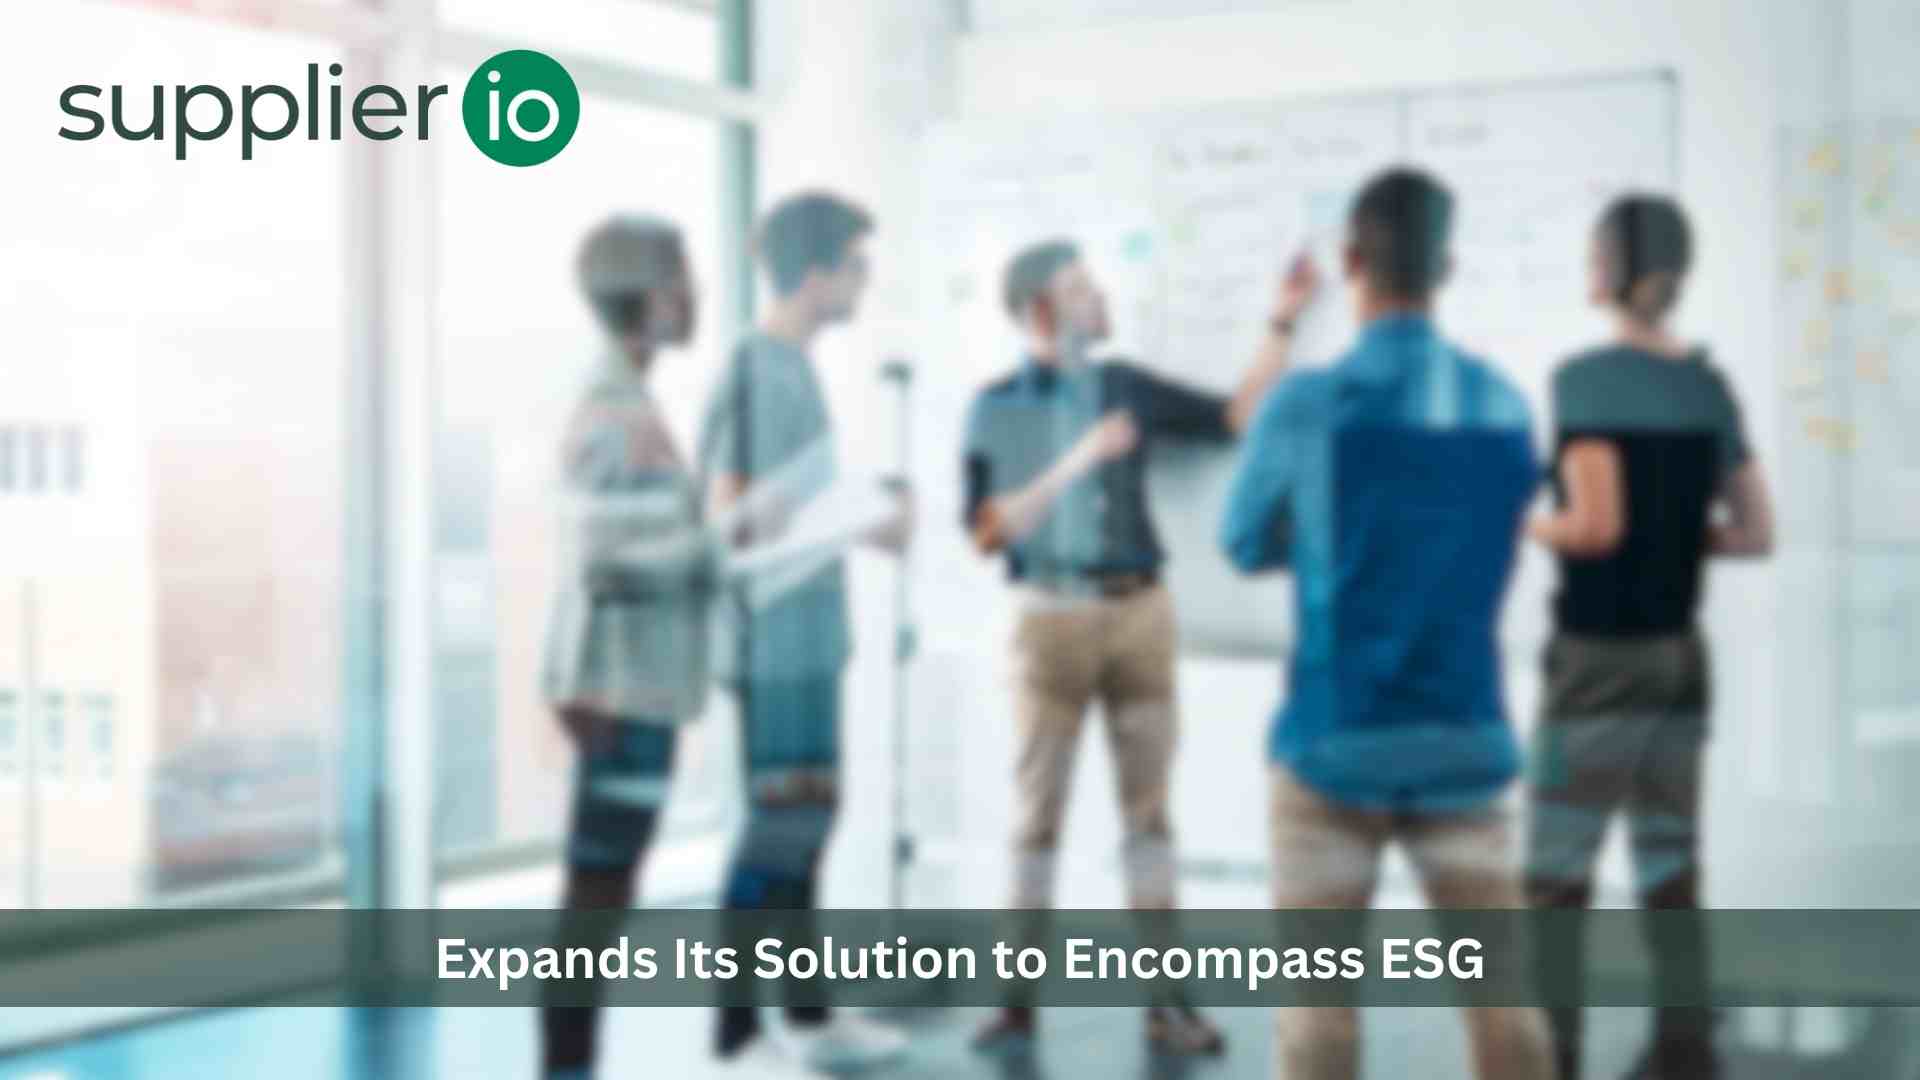 Supplier.io Expands Its Solution to Encompass ESG